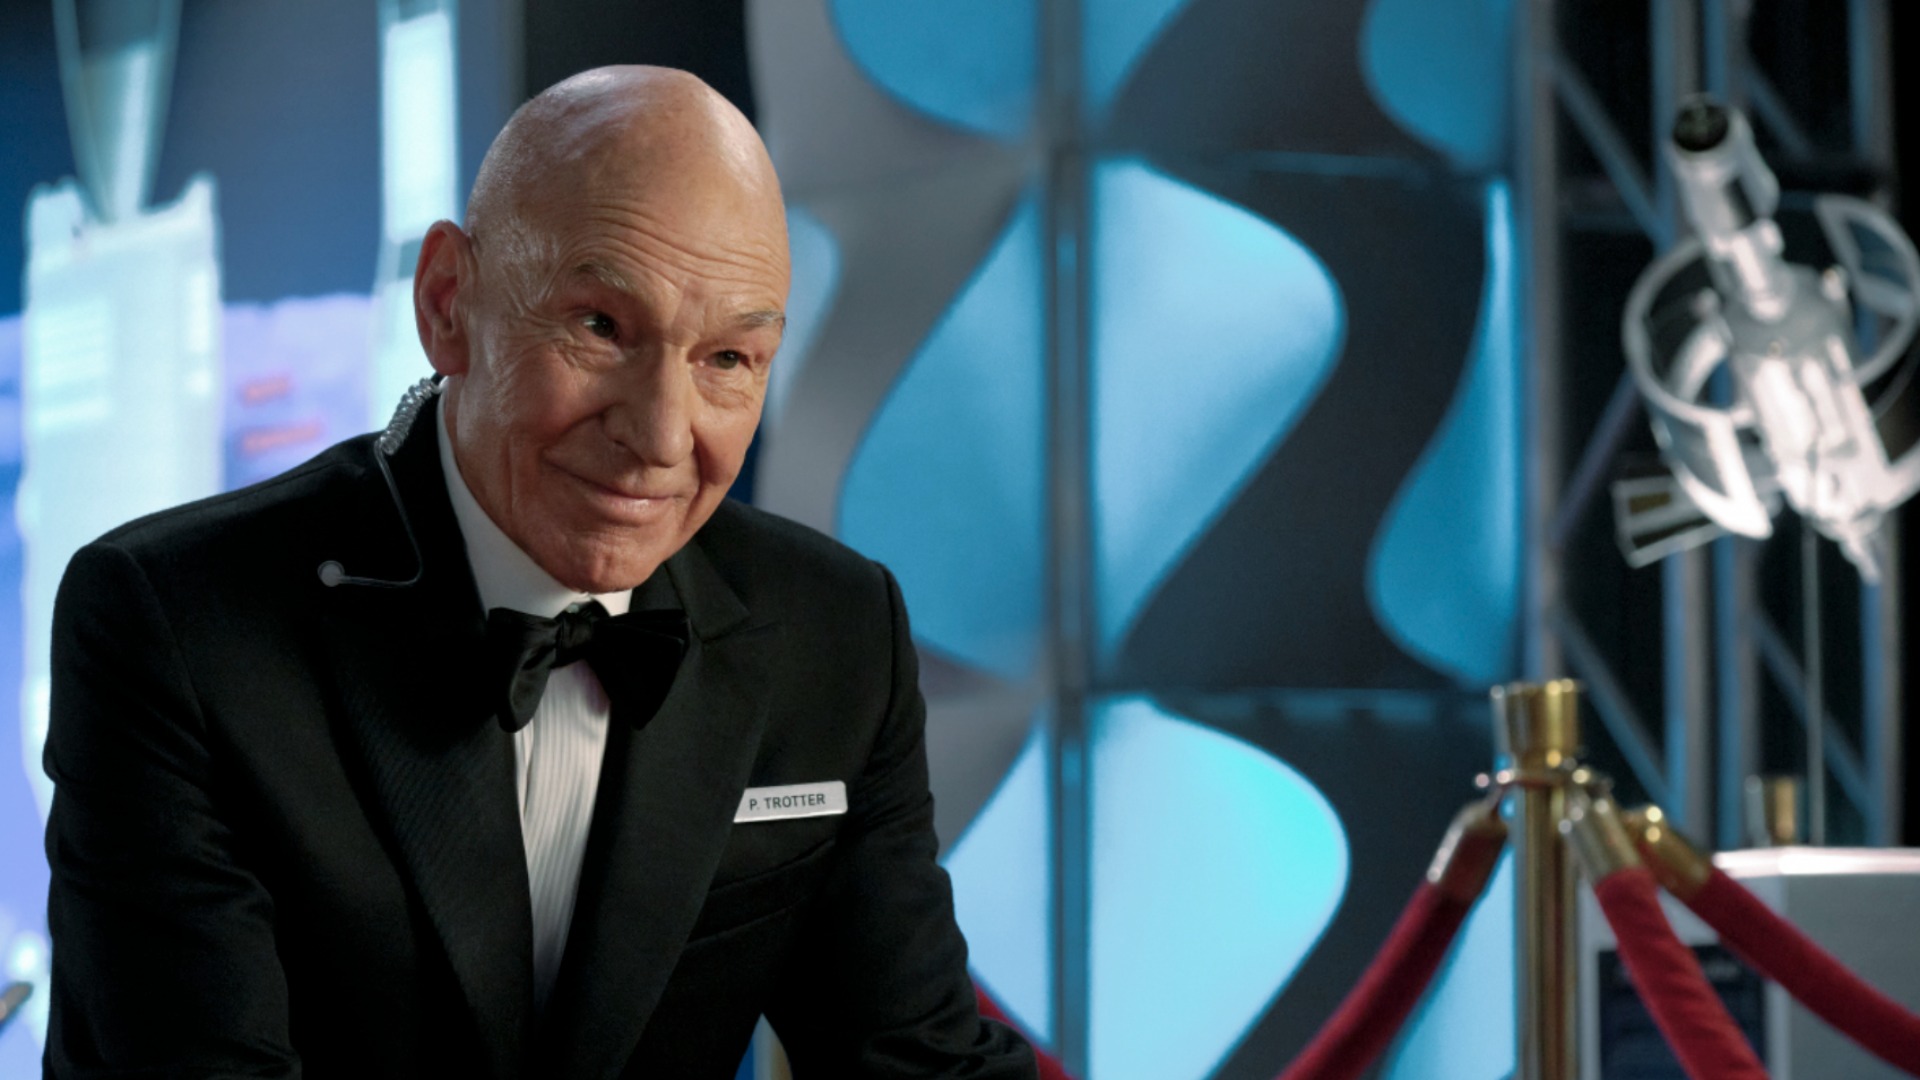 Star Trek: Picard season 2 episode 6 review: “Fast-paced, extremely quotable, and infectiously fun”ByRichard Edwardspublished 7 April 22Review